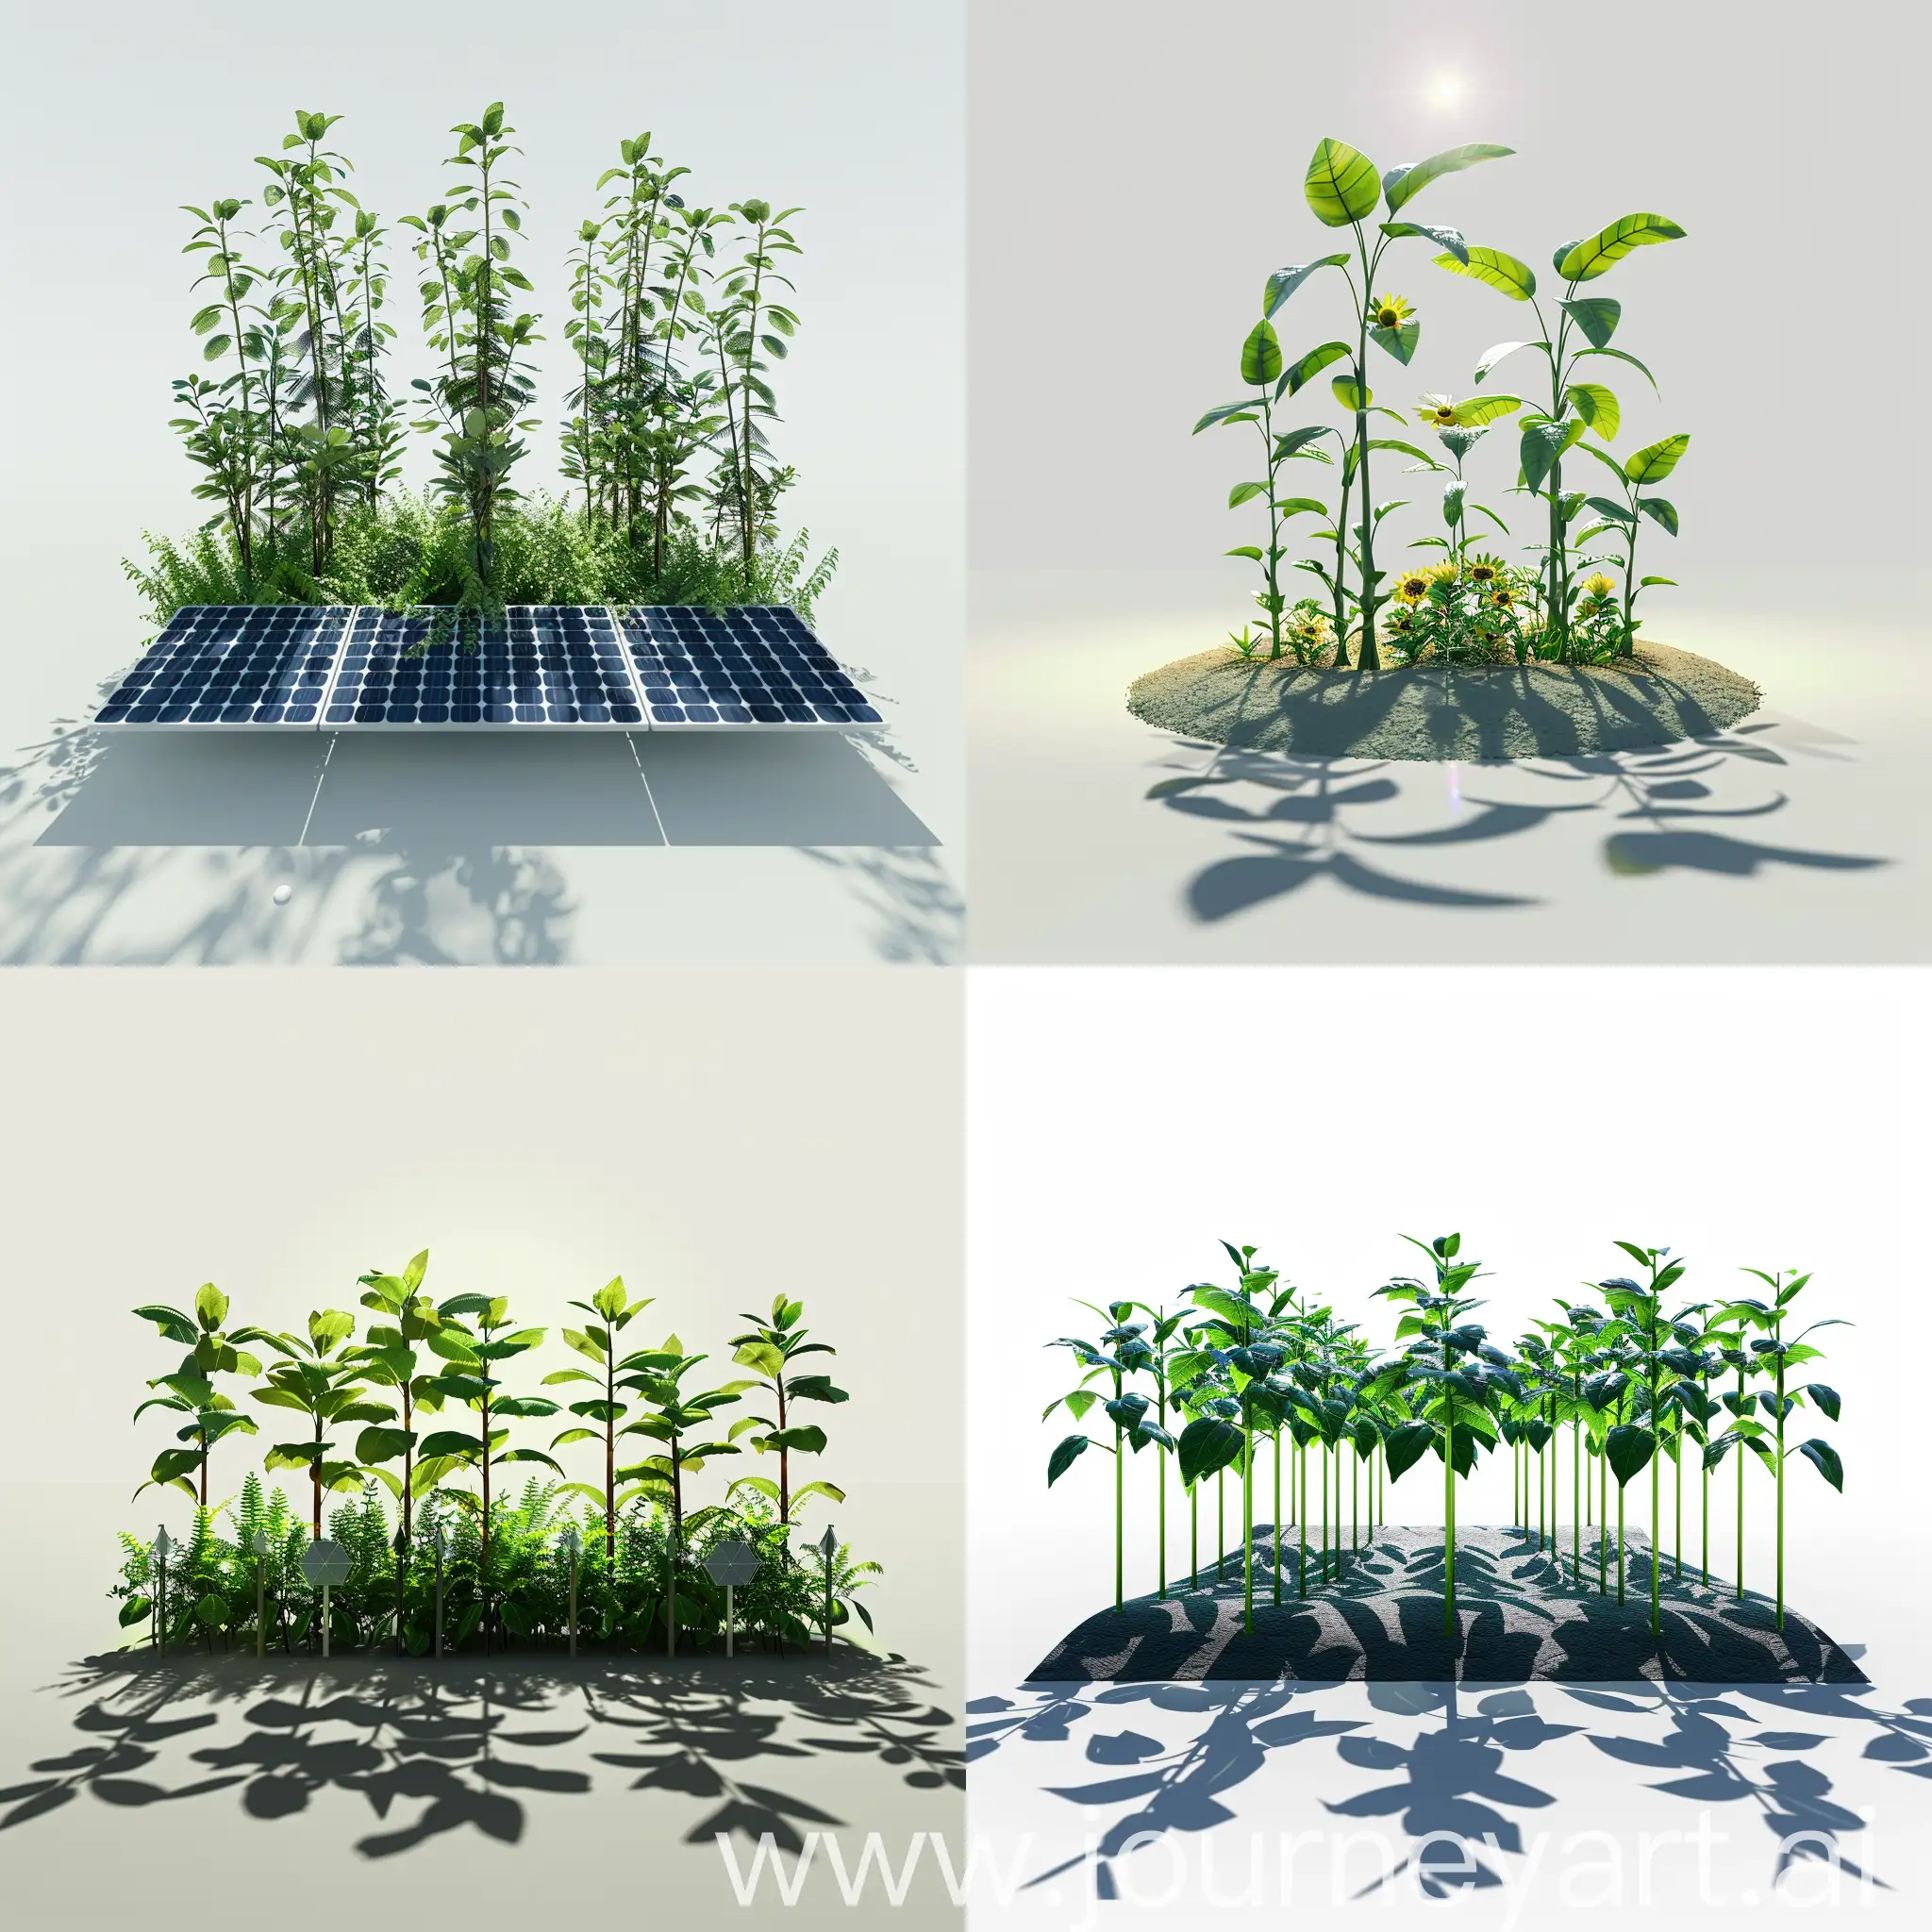 Sustainable-Solar-Energy-Concept-with-Lush-Plant-Accents